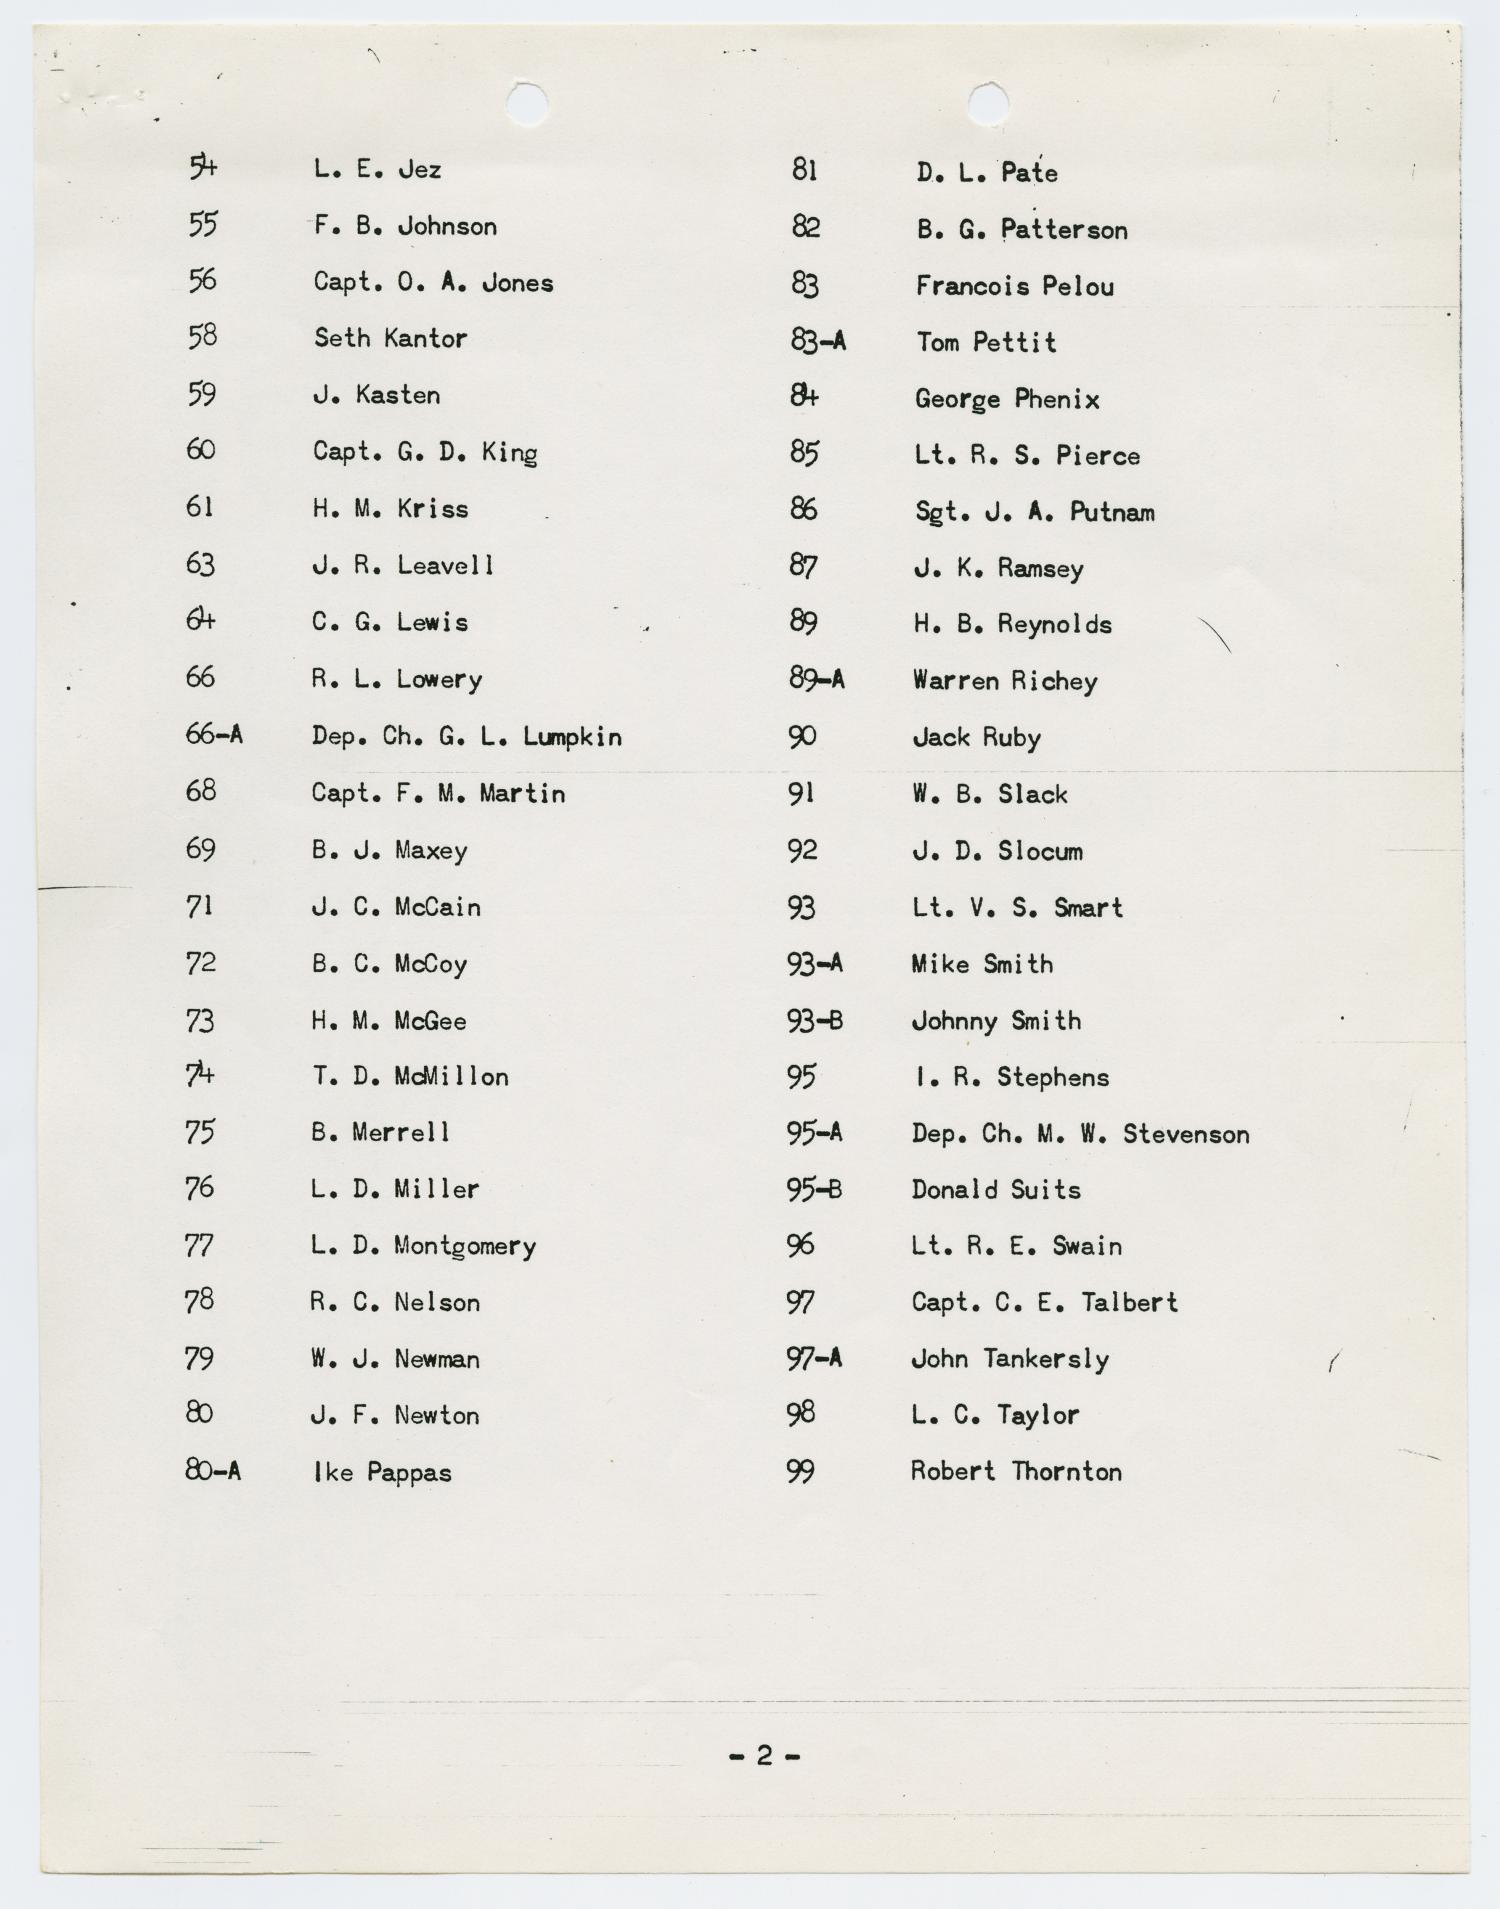 Page_2_of_list_of_personnel_in_basement_